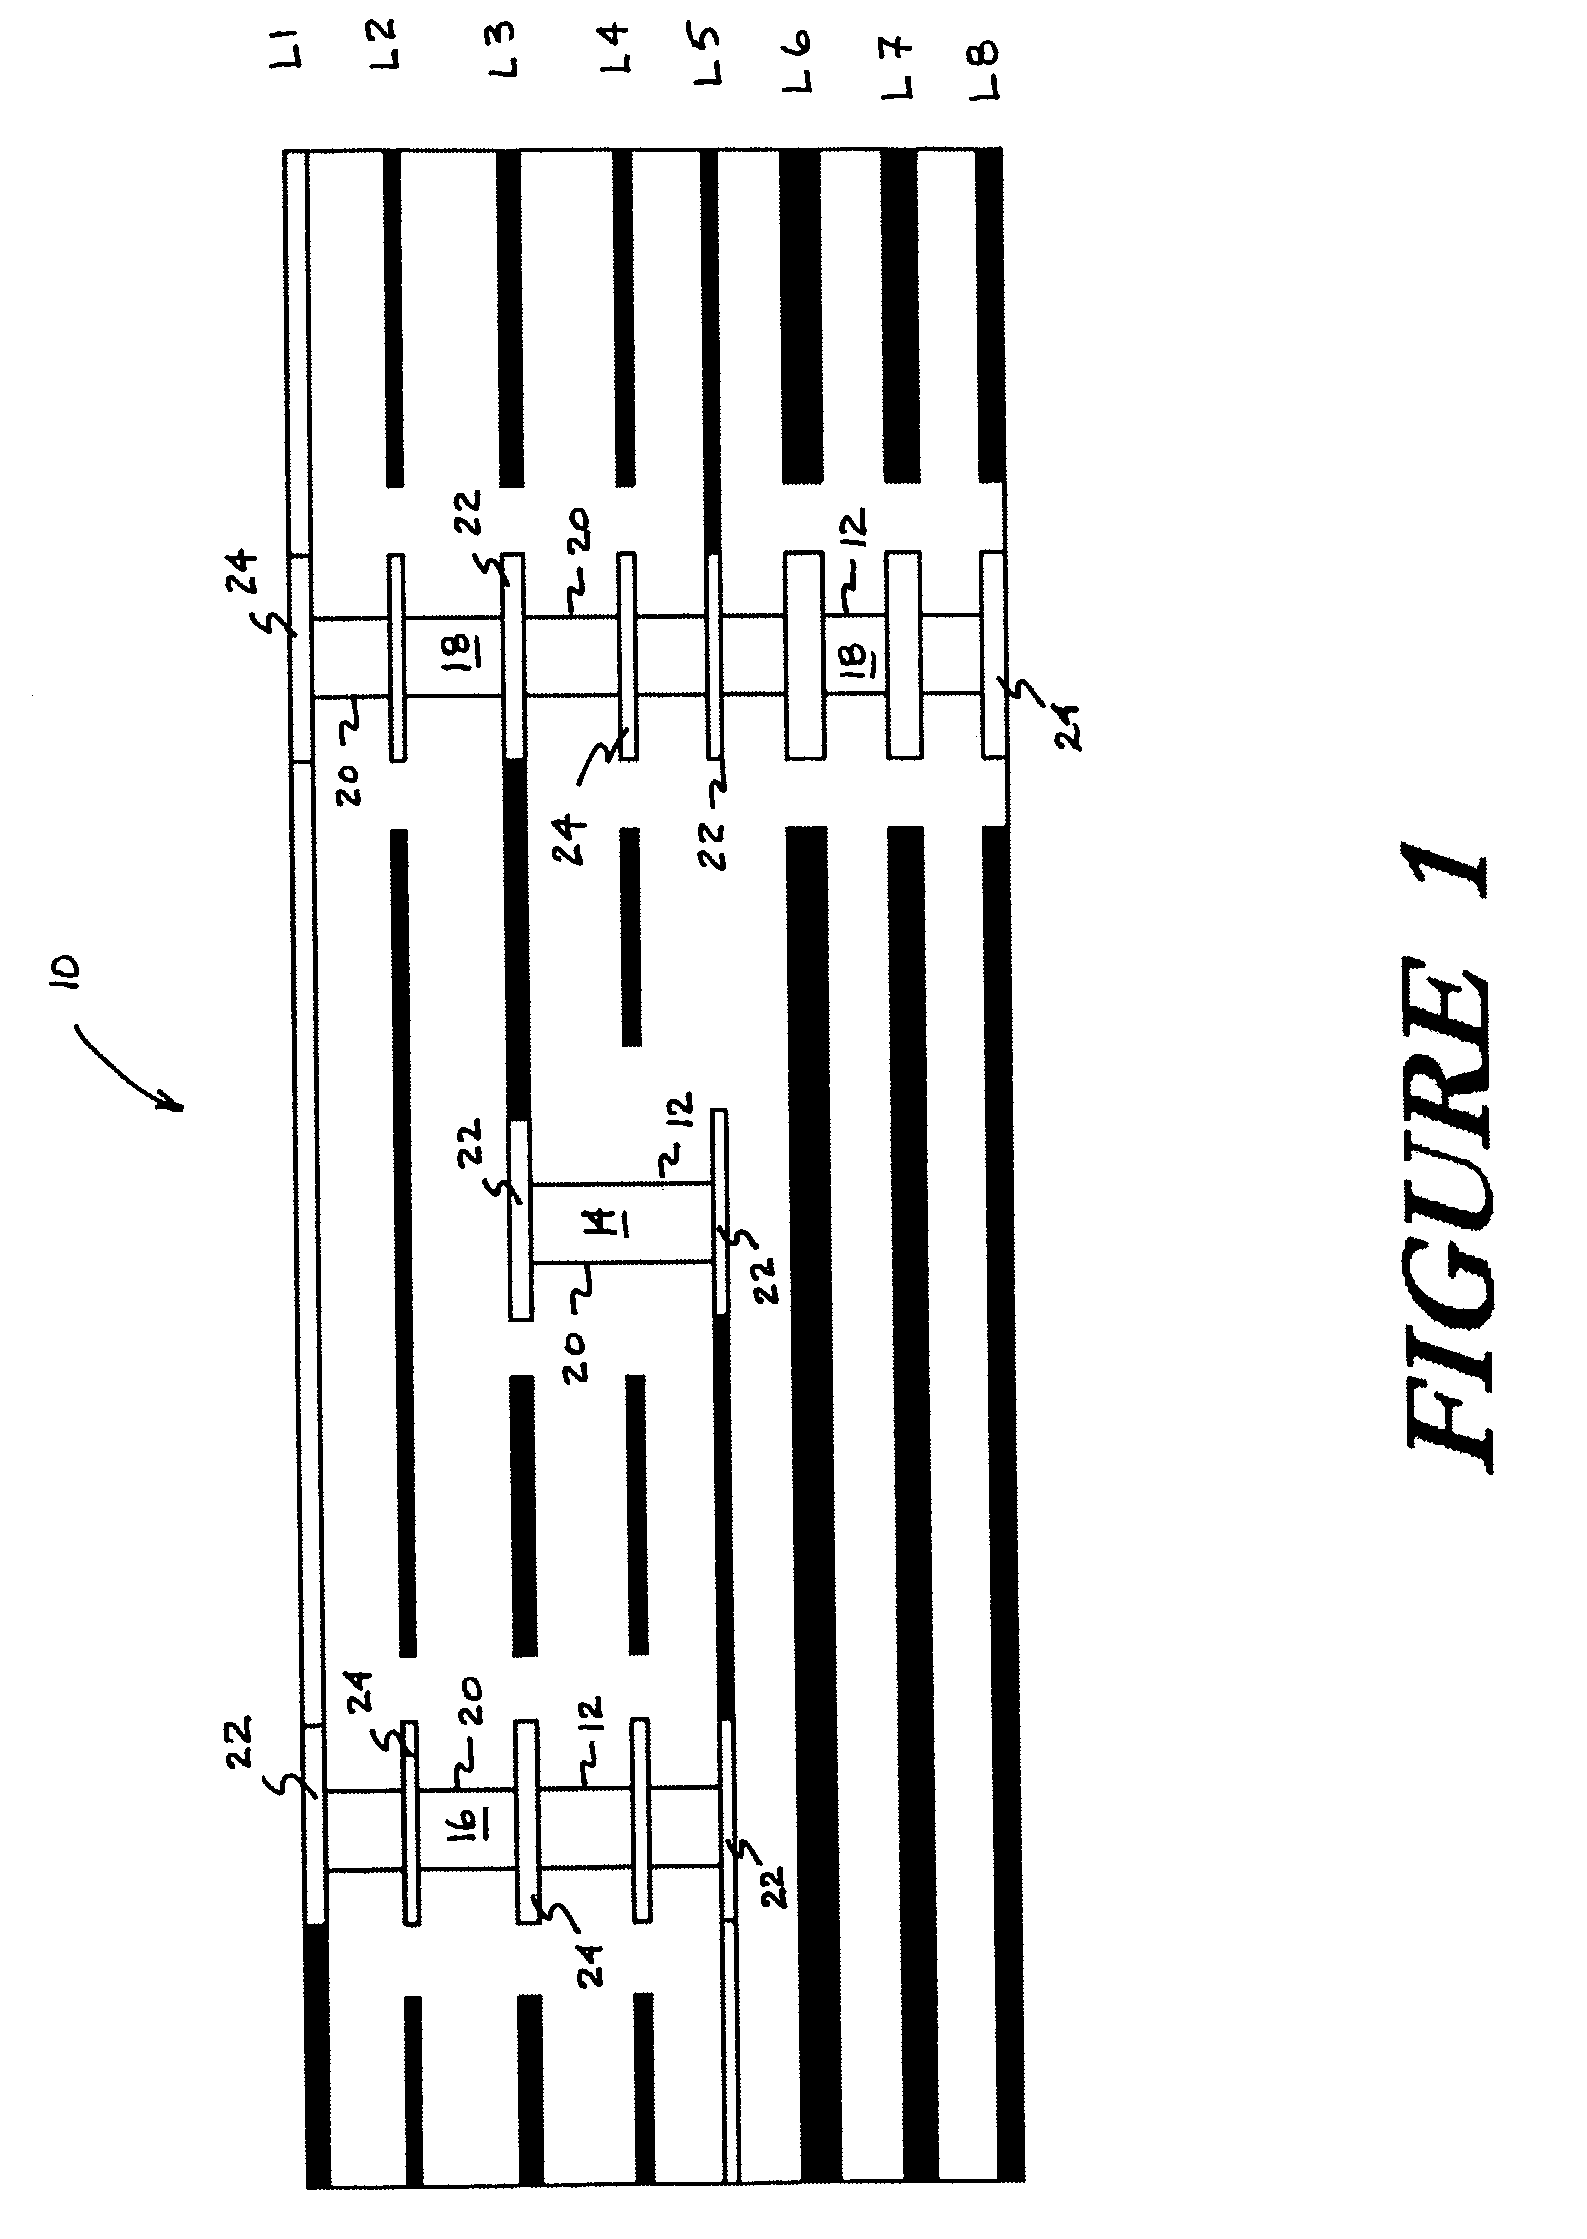 Method for optimizing high frequency performance of via structures